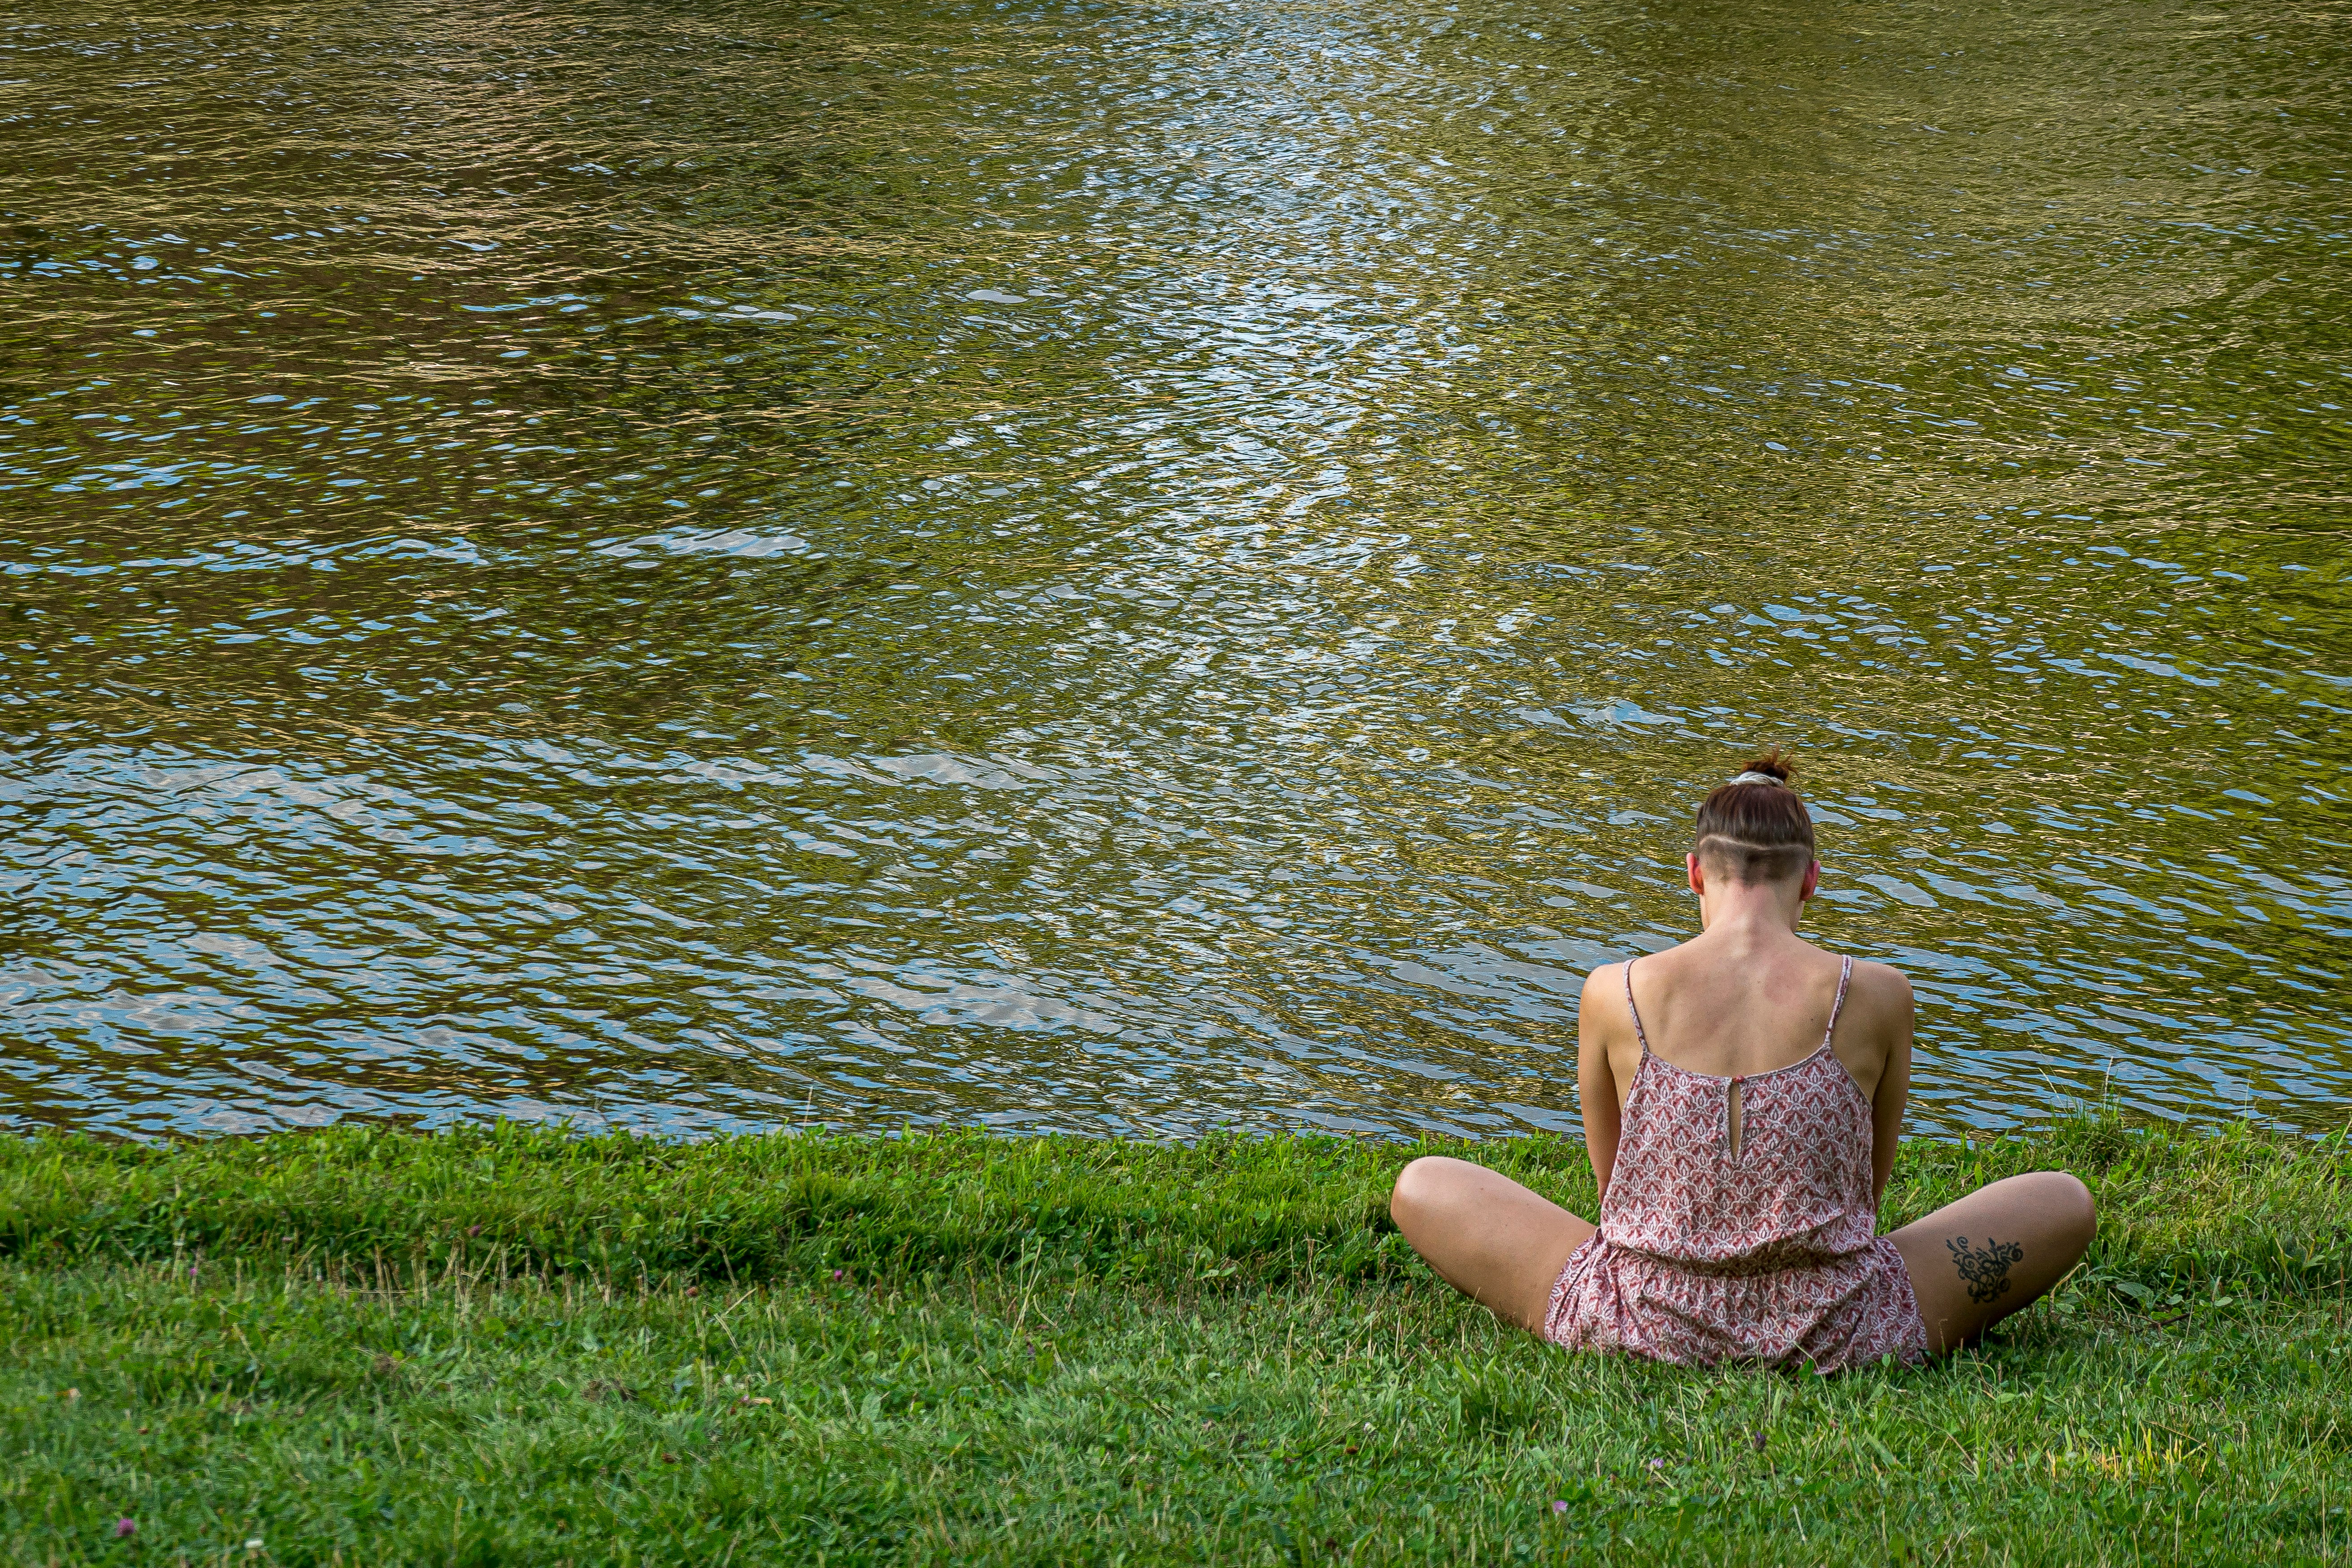 woman in brown tube dress sitting on green grass field near body of water during daytime